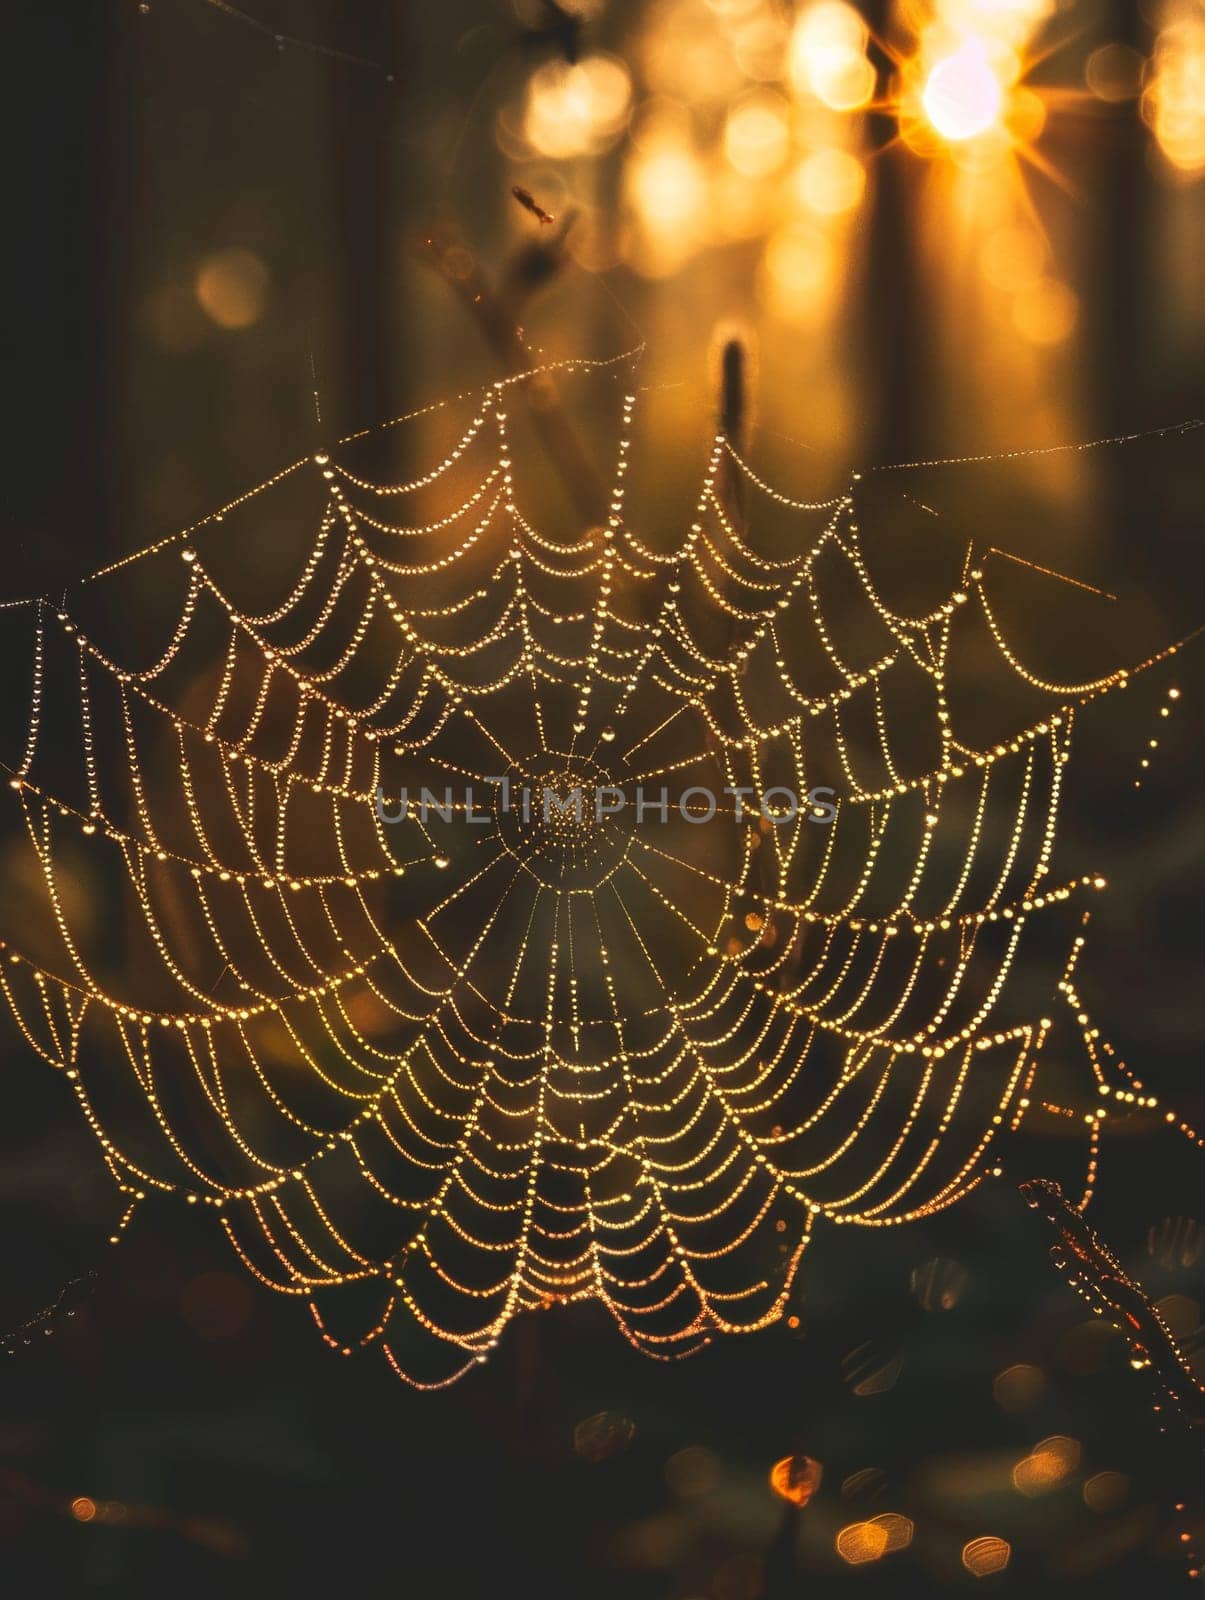 Morning dew clings to the delicate strands of a spiderweb, illuminated by a golden sunrise that infuses the scene with warmth.. by sfinks